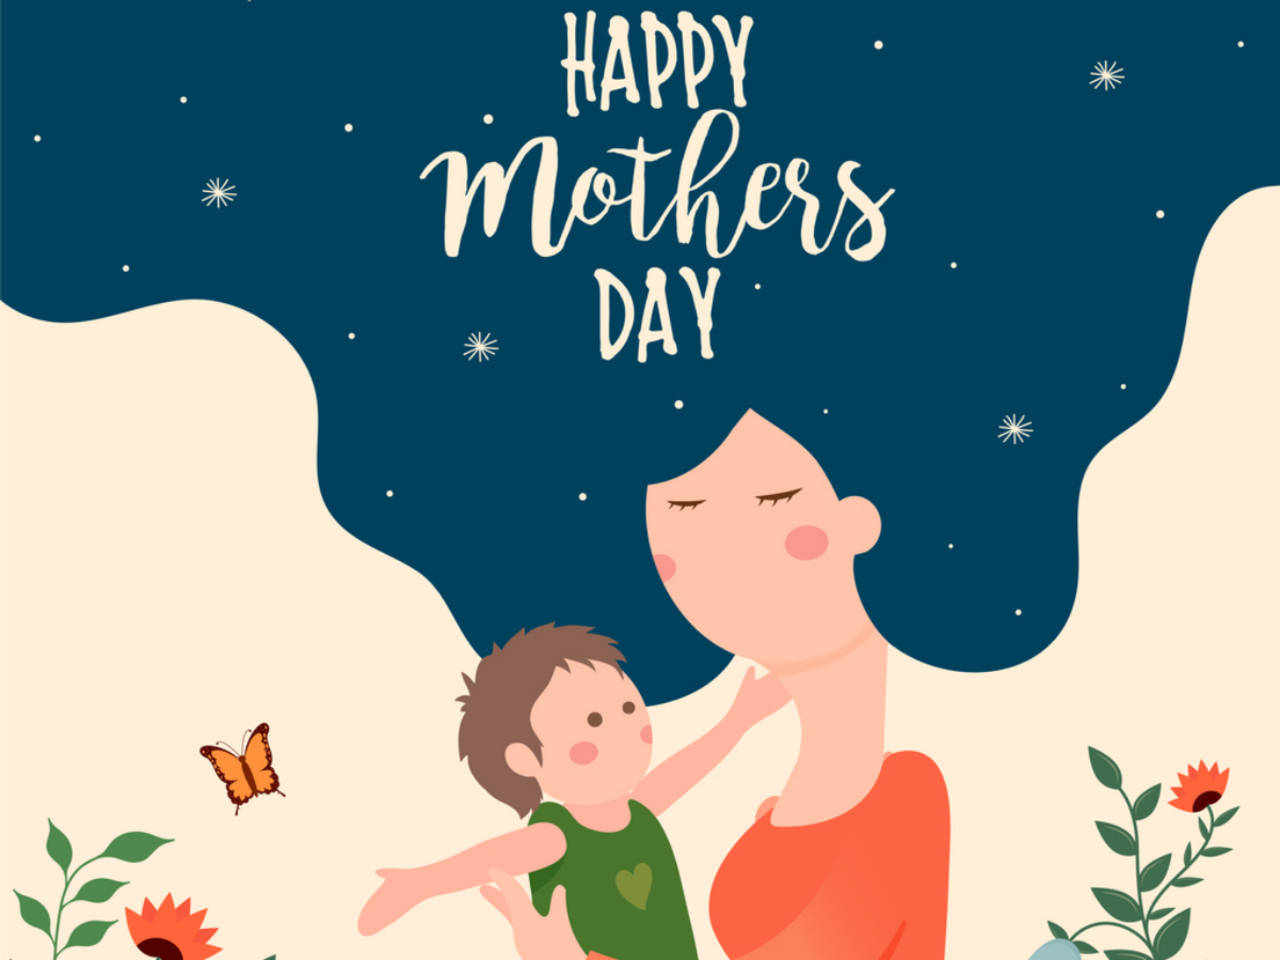 Extensive Collection of 999+ HighDefinition Happy Mother's Day Images